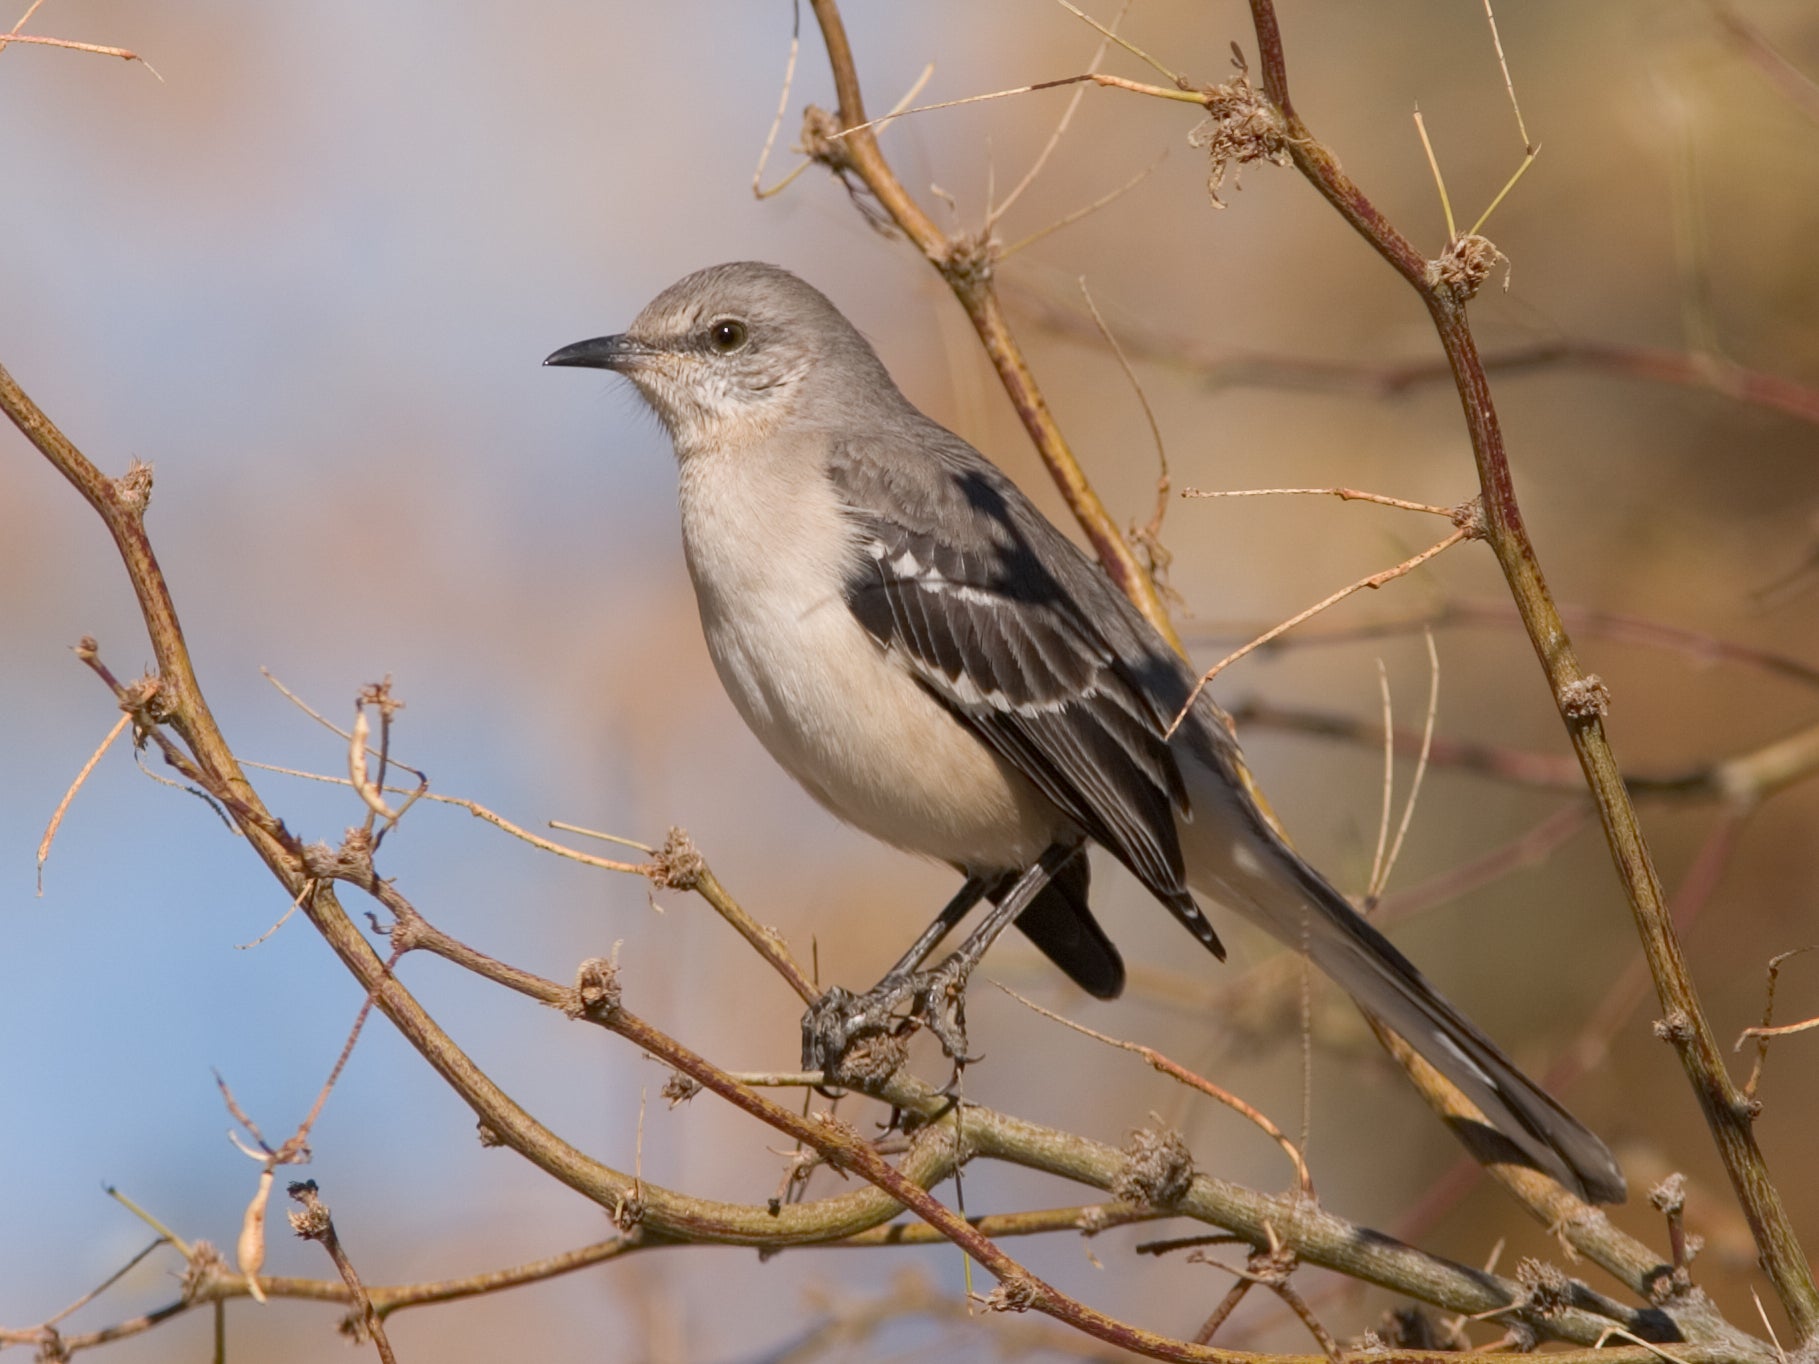 A rare Northern Mockingbird was spotted in the garden of Exmouth resident, Chris Biddle, on 6 February 202